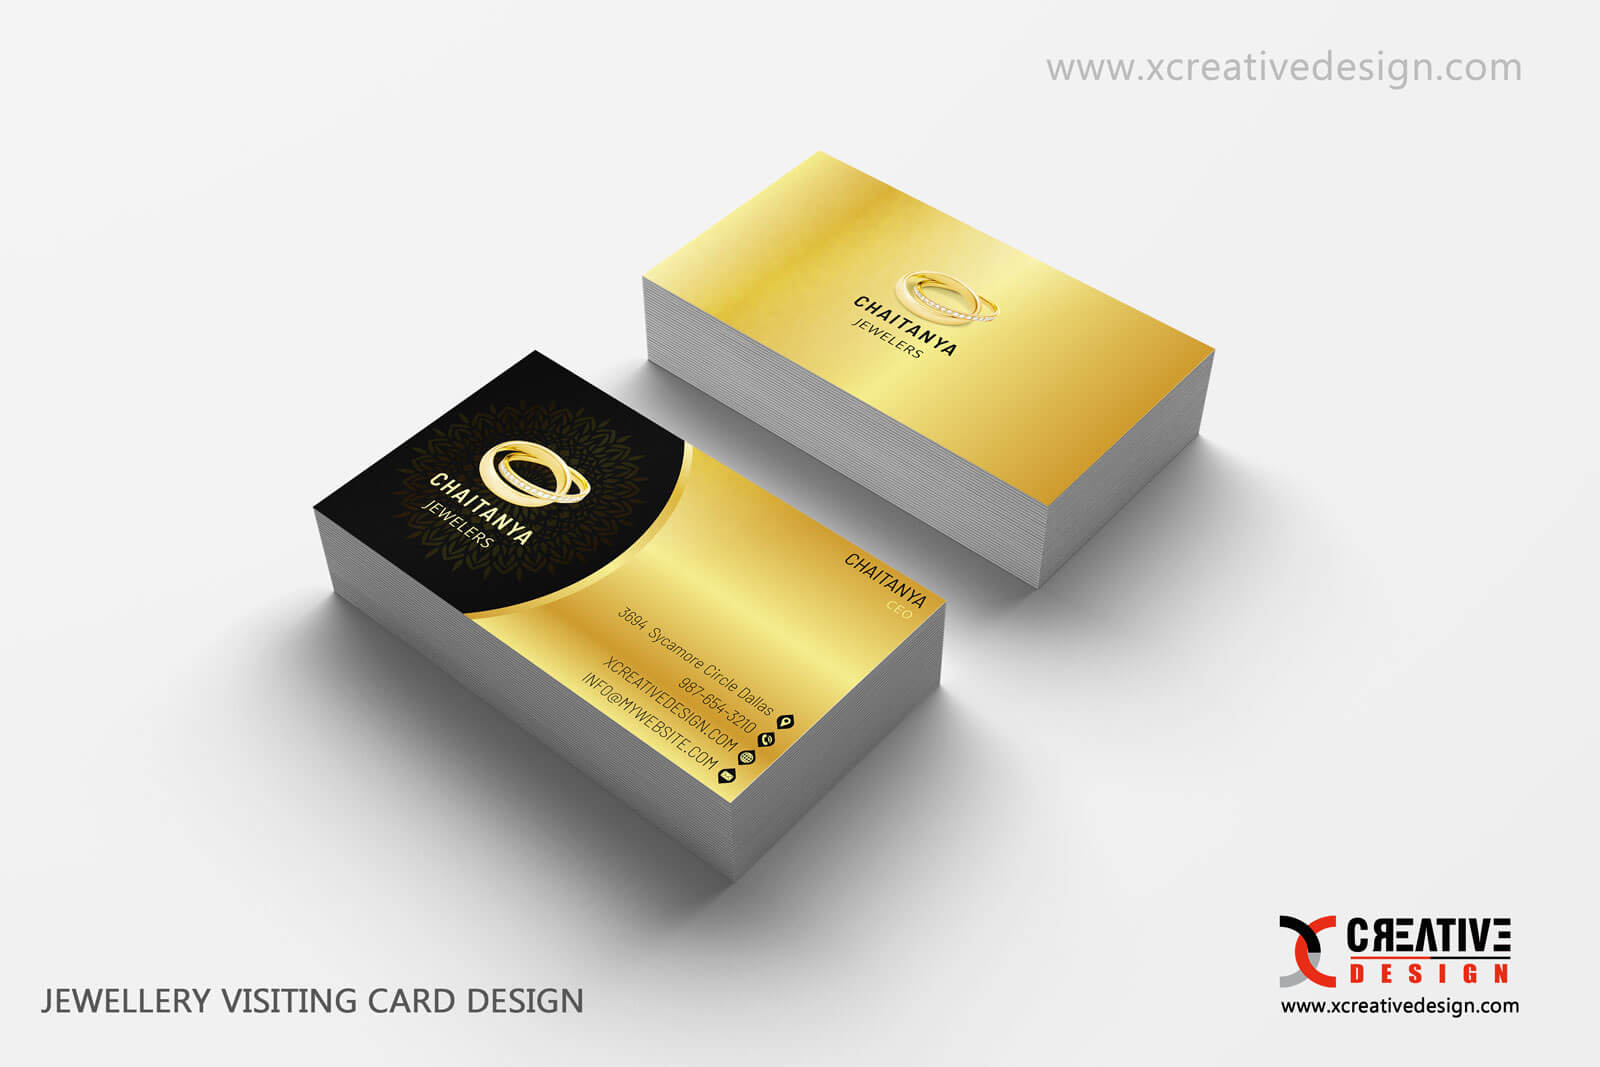 Download free Jewellery Visiting Card Design in Vector and Cdr